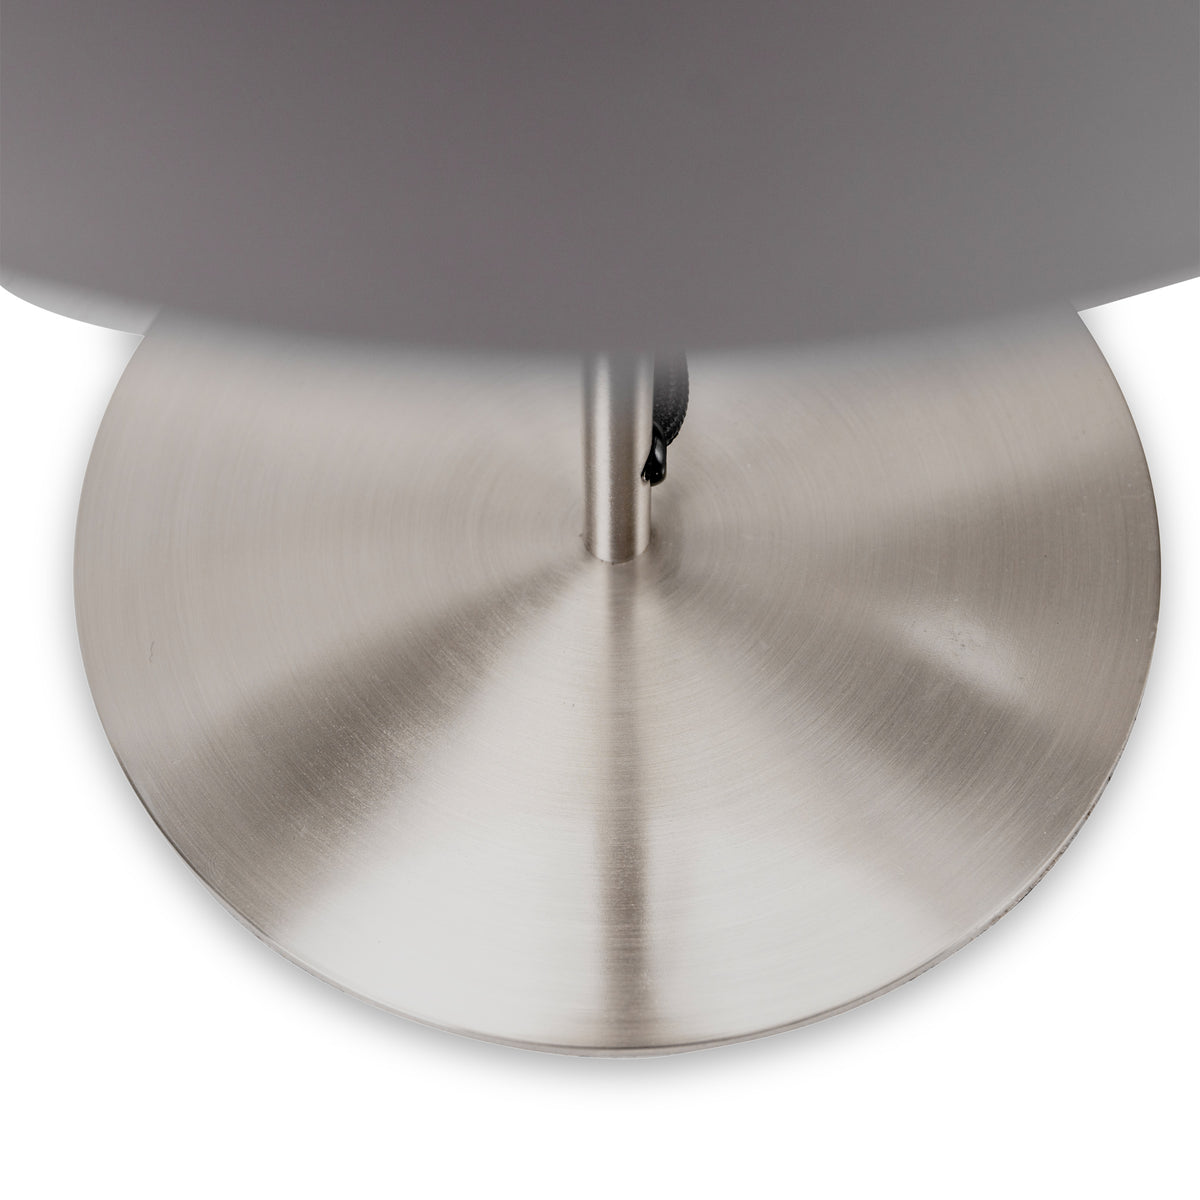 Elin Brushed Silver & Steel Grey Table Lamp